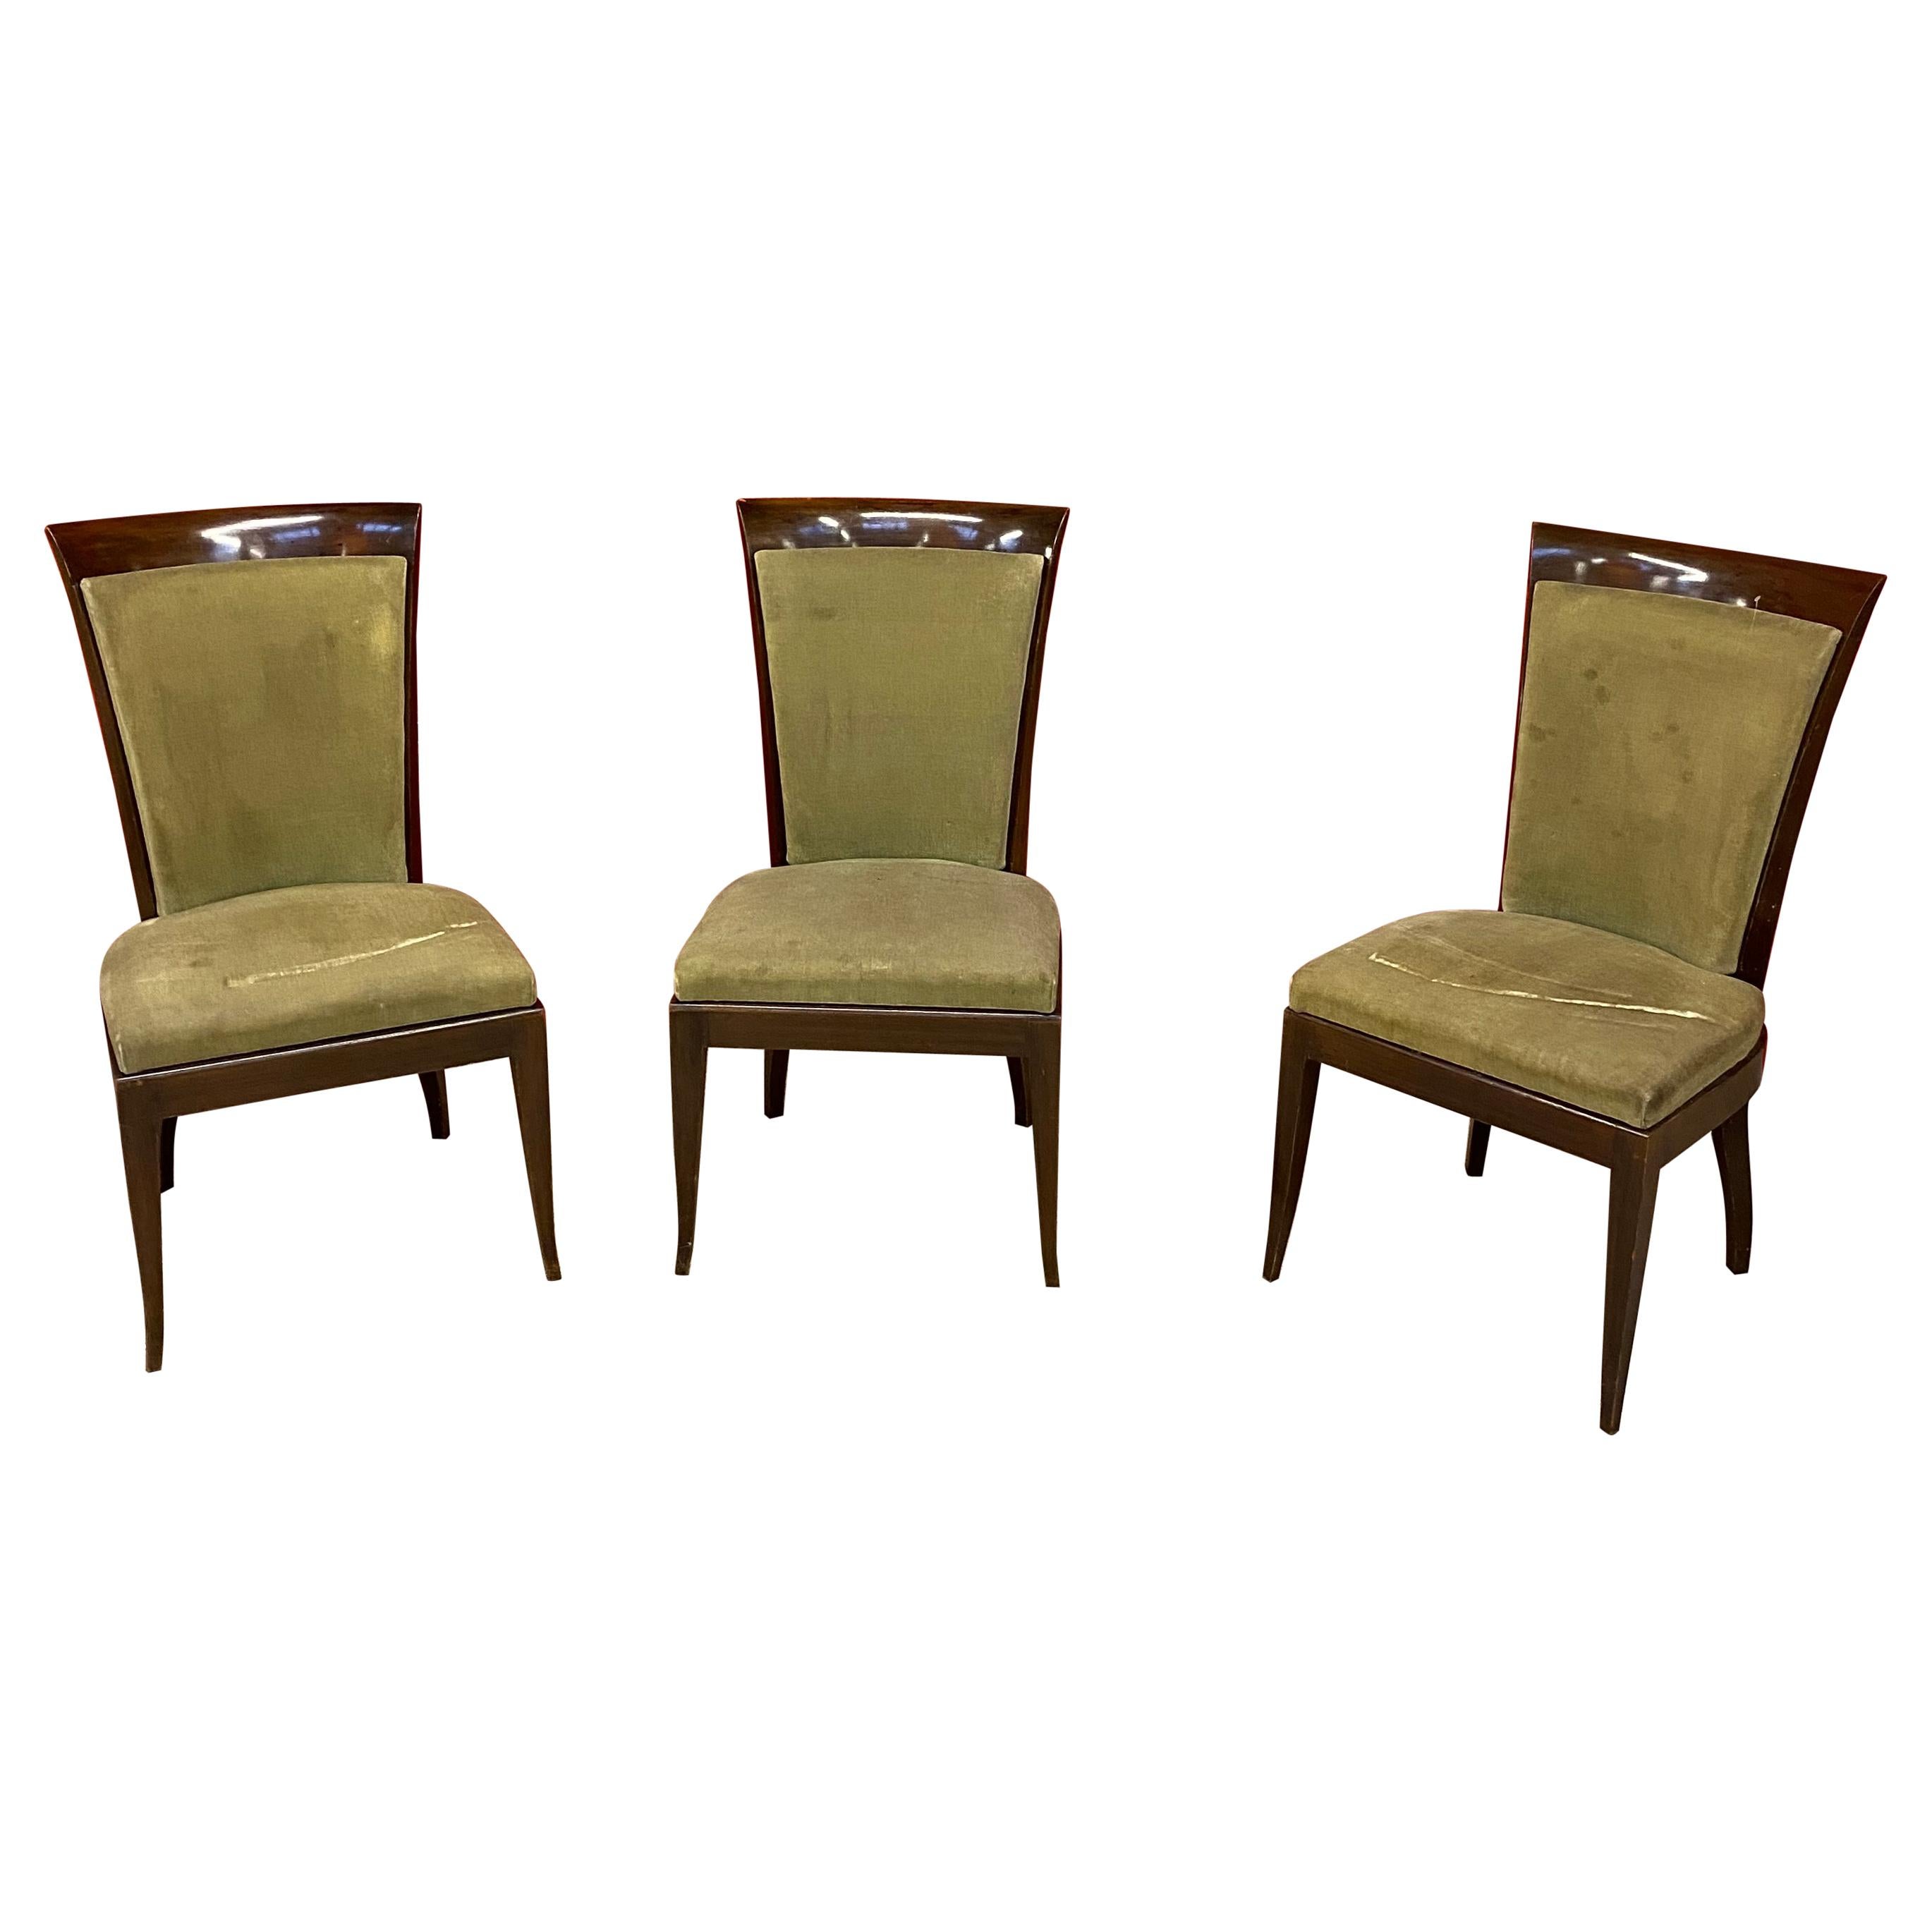 De Coene, 3 Large Art Deco Chairs in Solid Mahogany and Velvet, circa 1930 For Sale